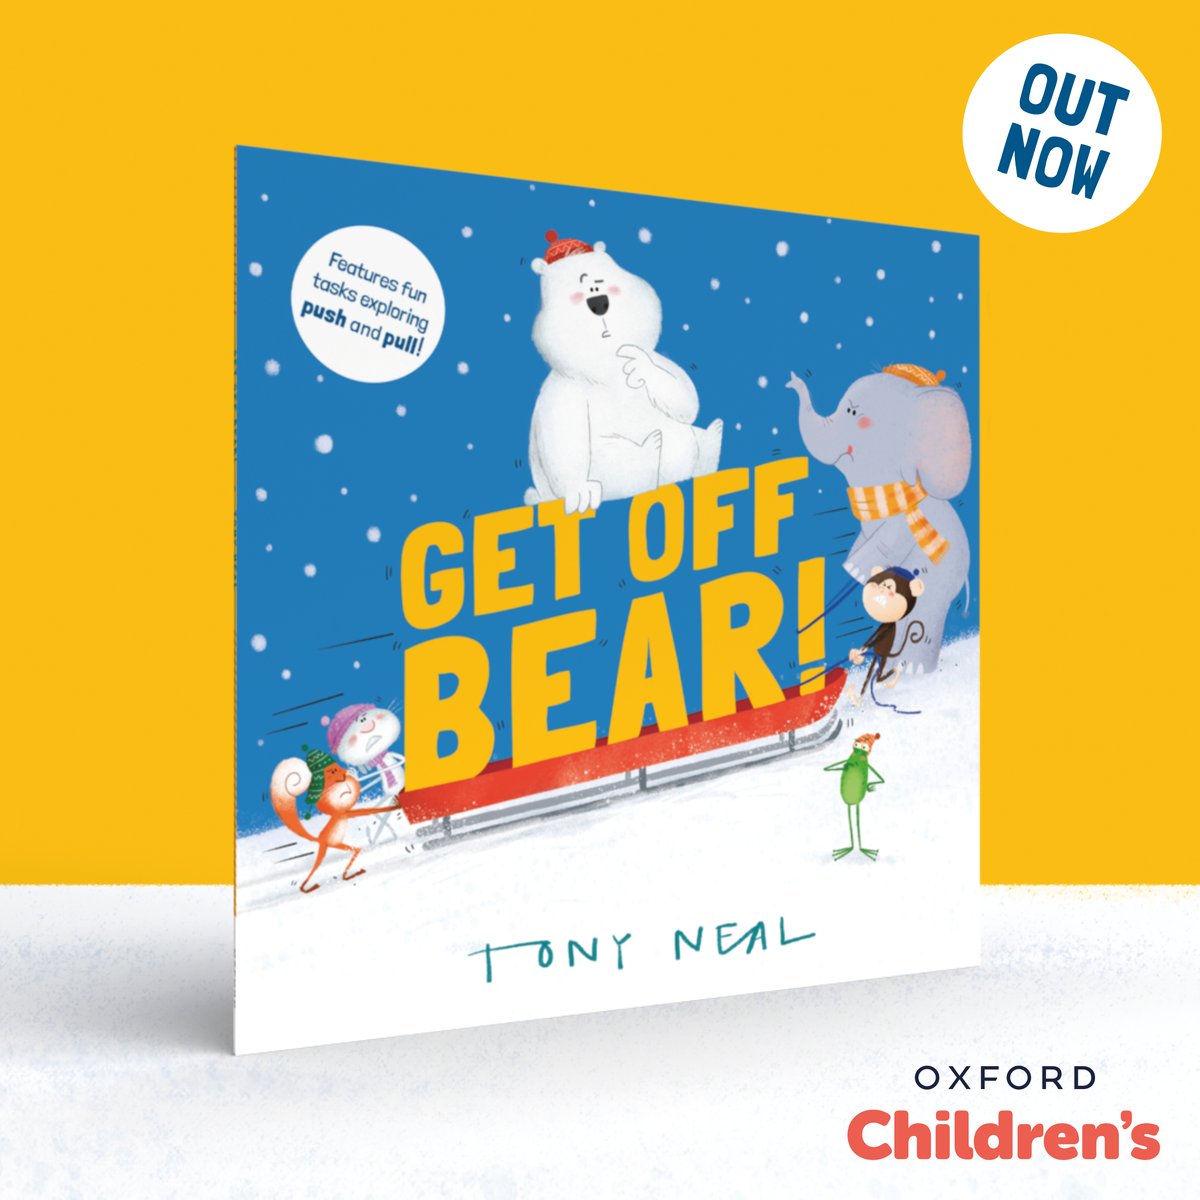 Get Off Bear! A hilarious introduction to early science concepts, part of our Animal Academy series🔬🐻

Bright, engaging artwork by @Tonynealart

Out Now! ow.ly/YGp750Q3tiY